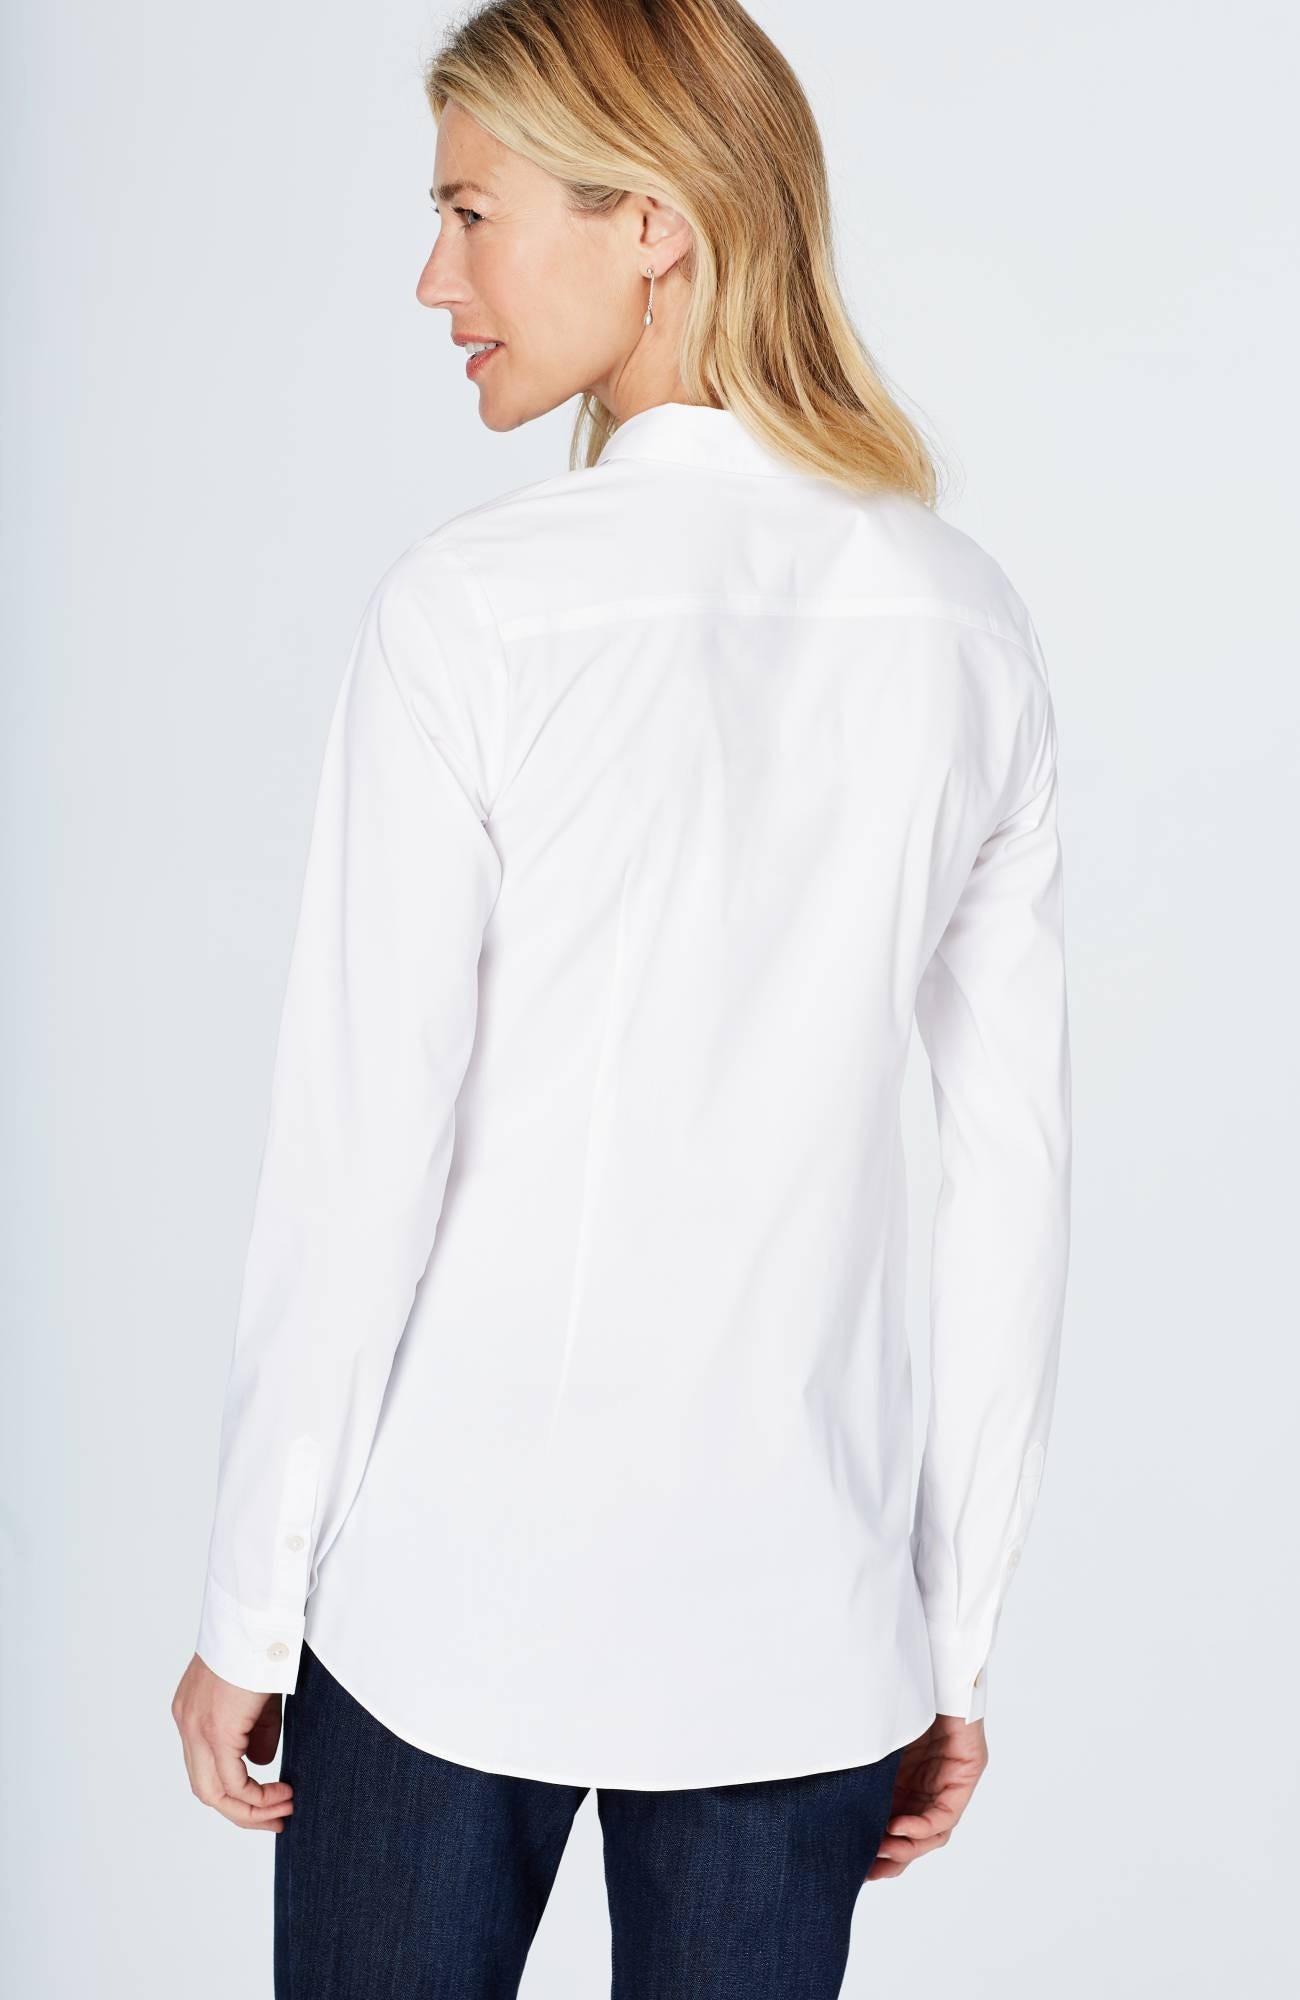 New J Jill Long Sleeves Buttoned White Linen Top All Sizes 